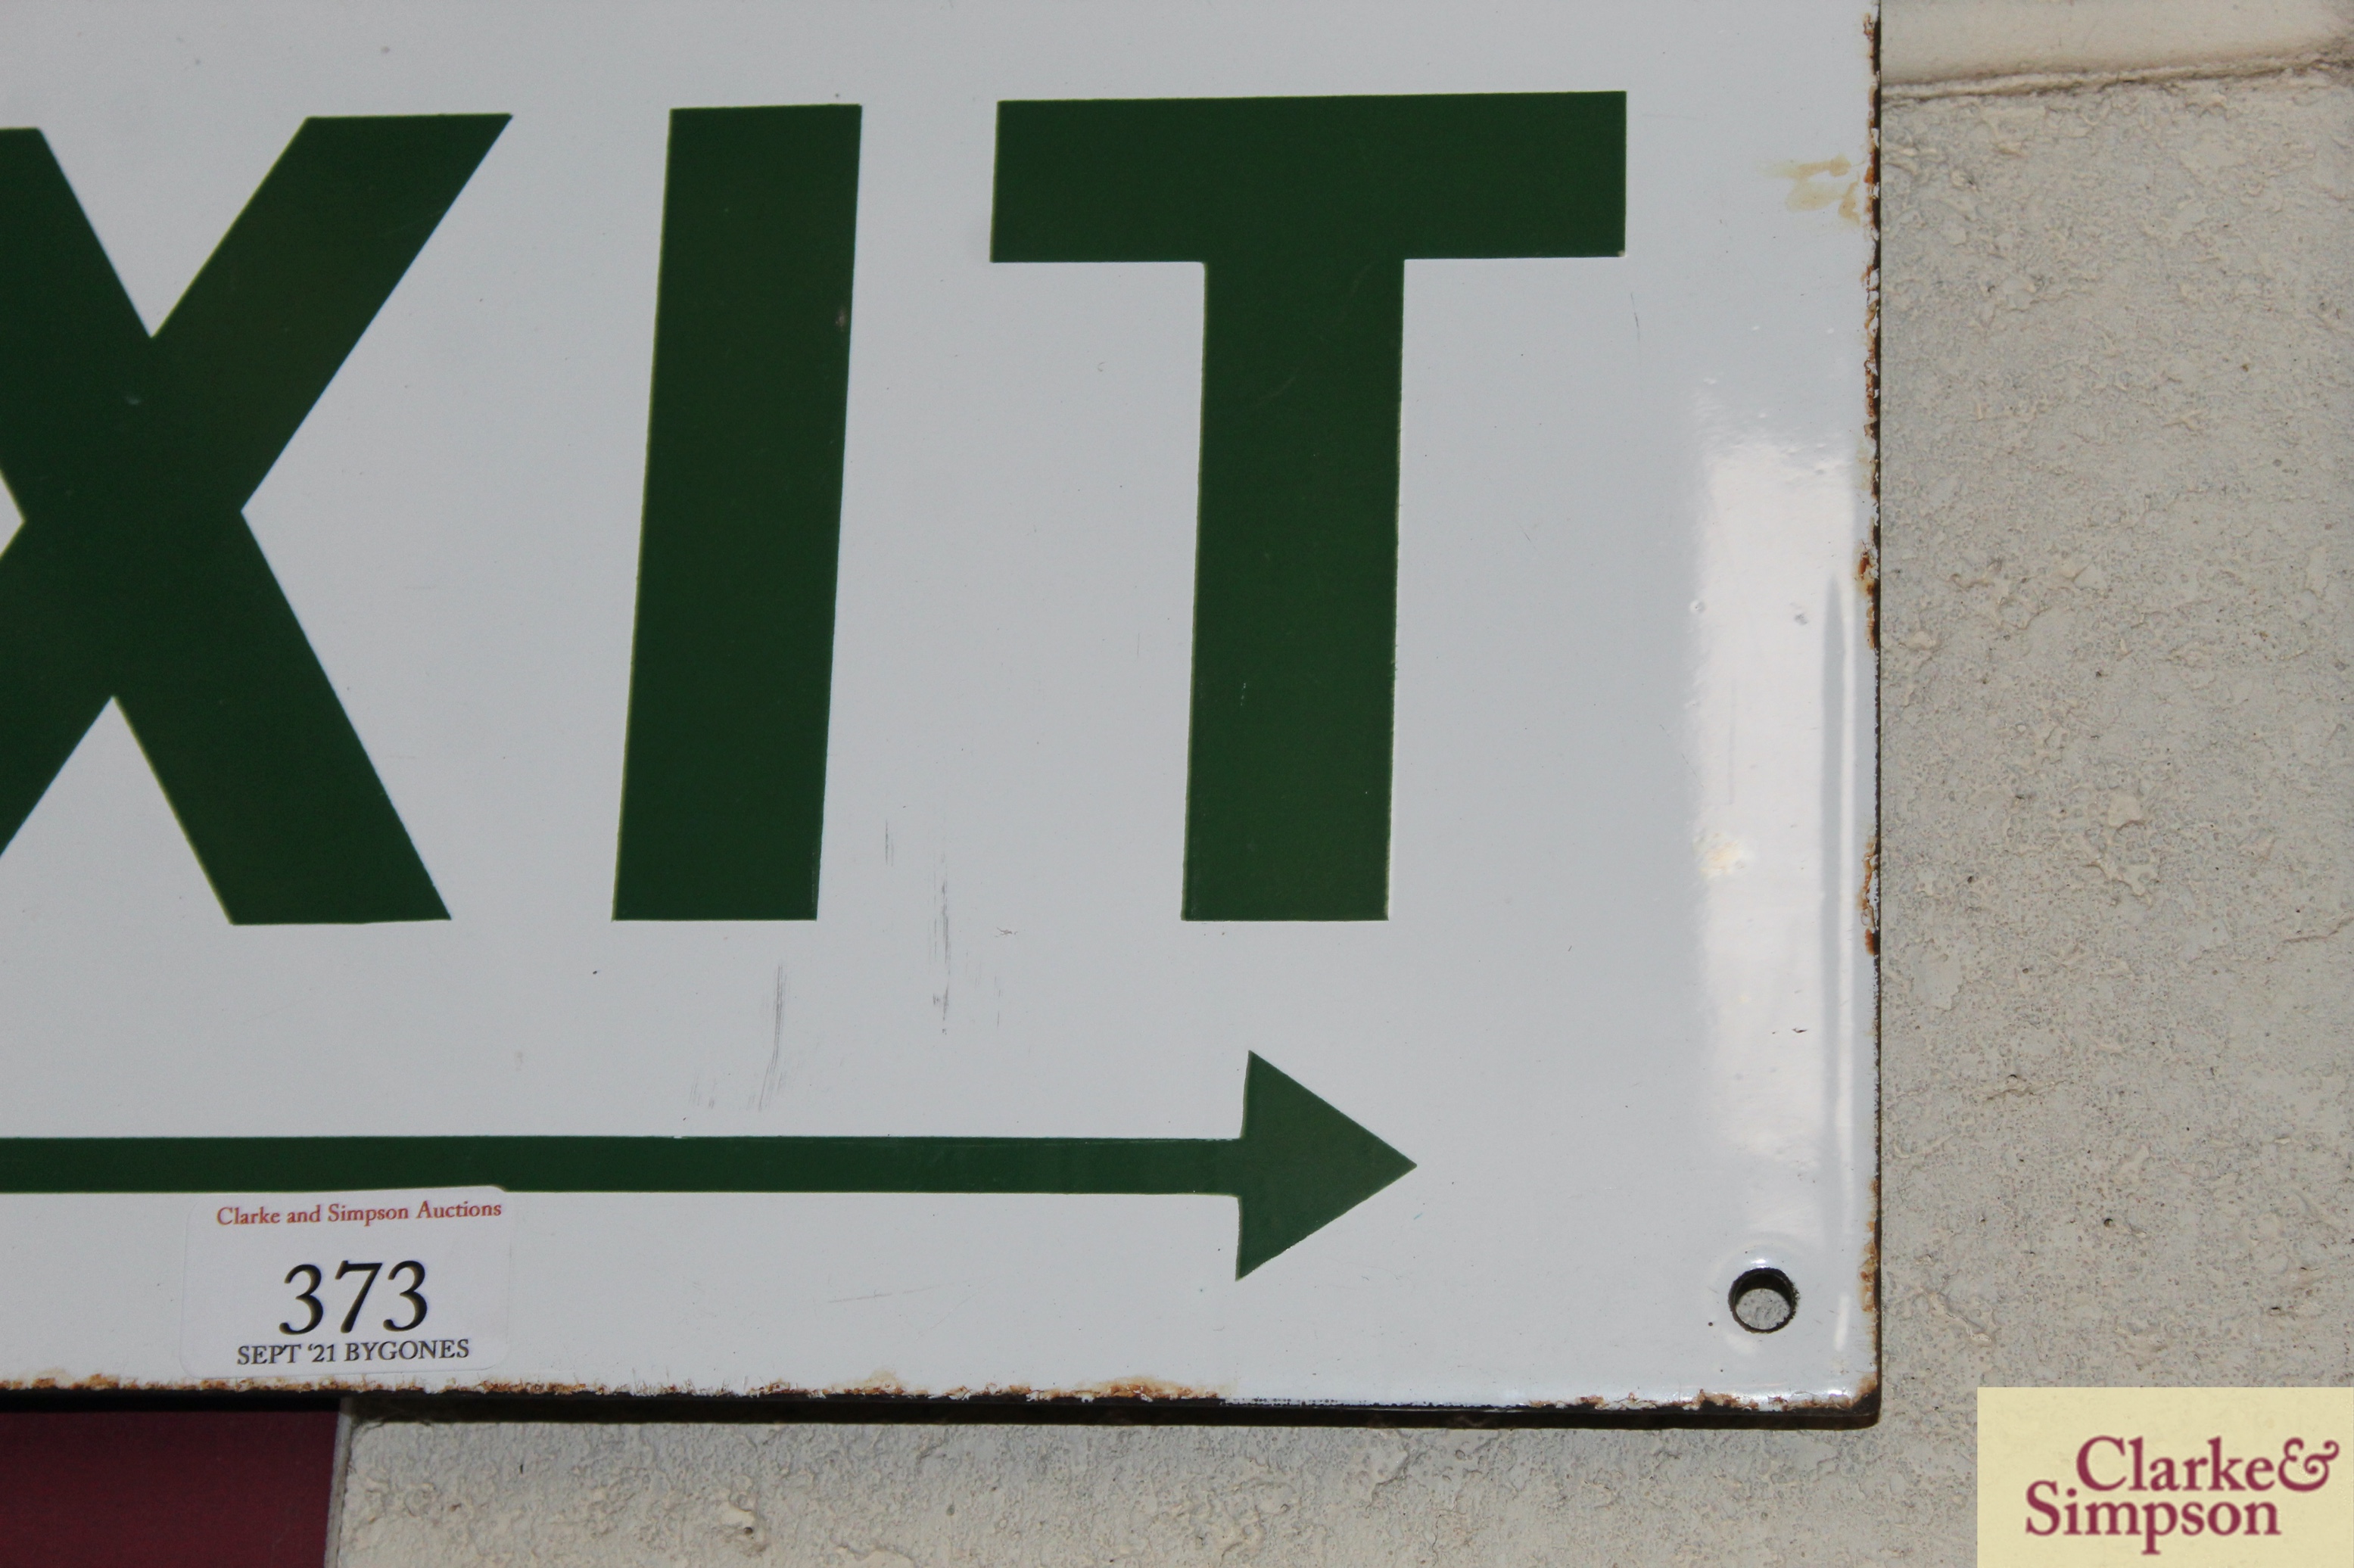 An enamel "Fire Exit" sign approx. 12" x 14" - Image 4 of 5